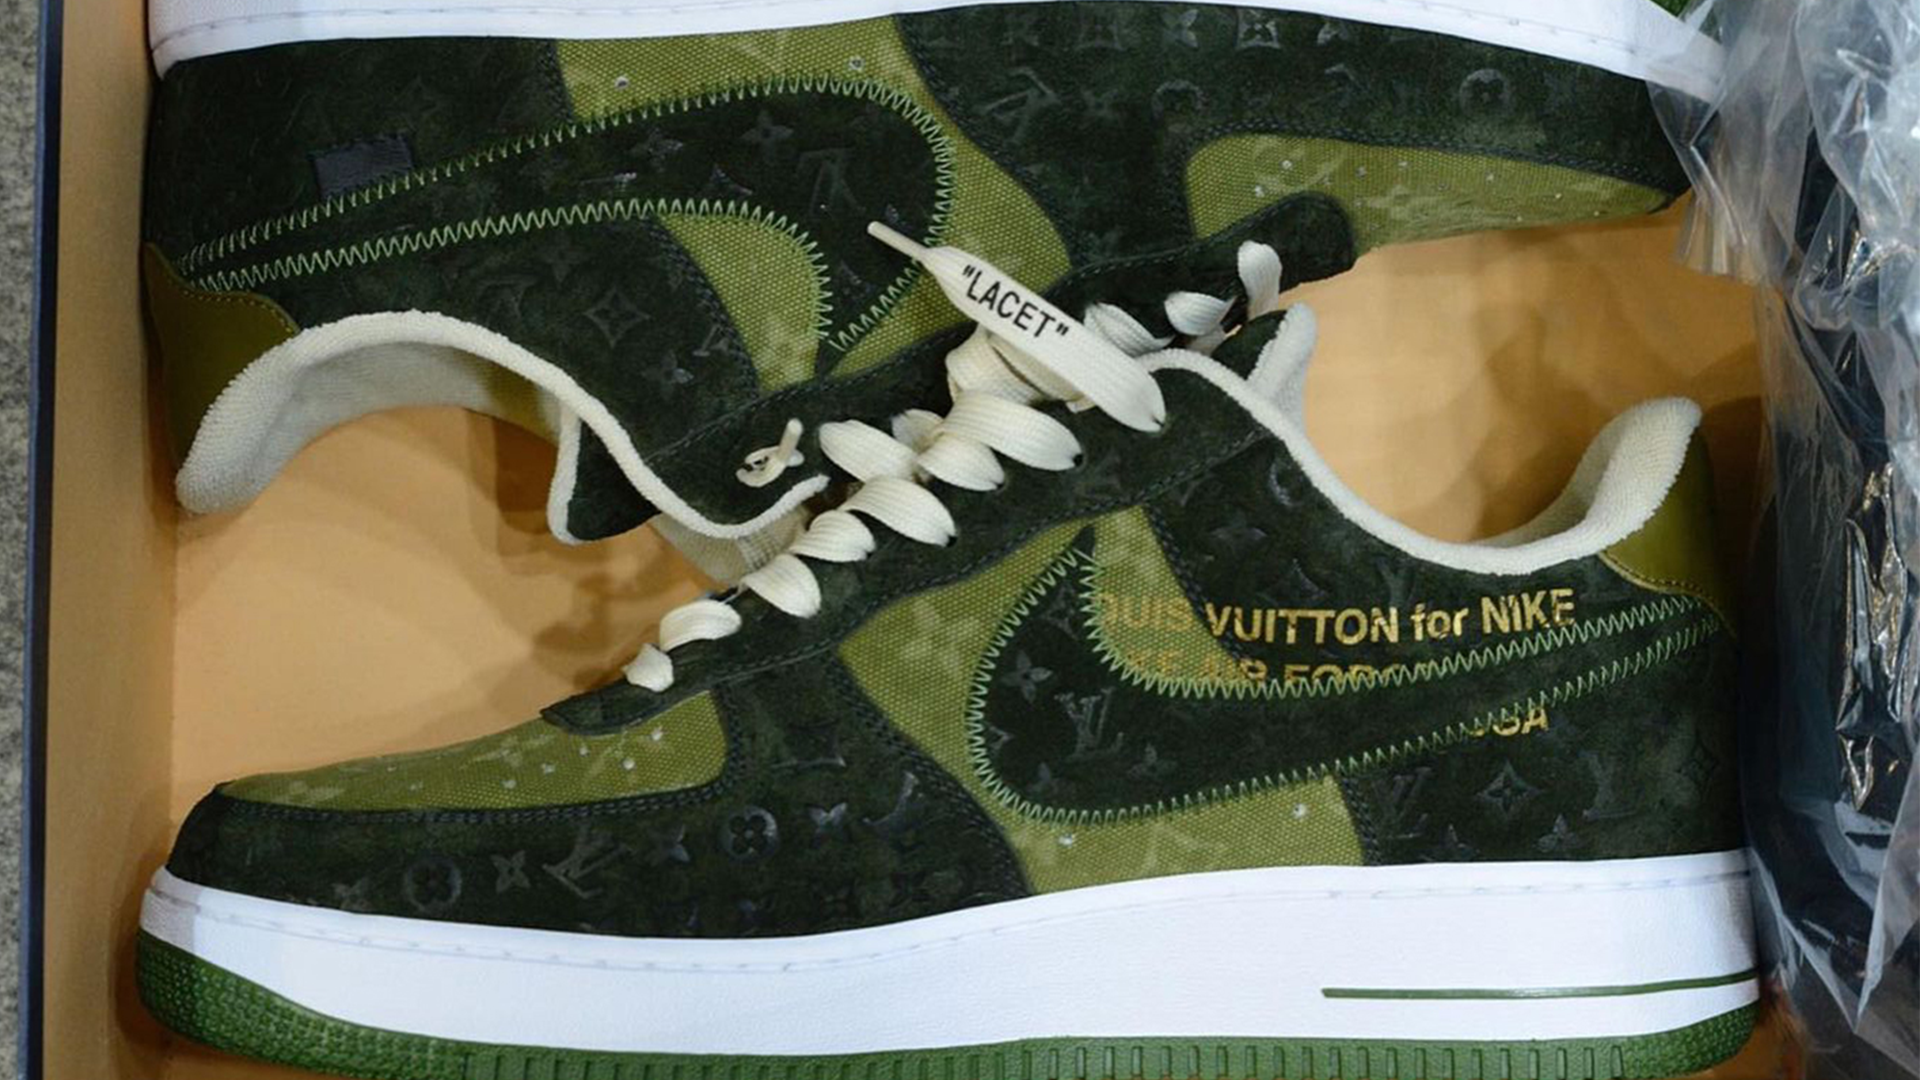 Images Of a New Louis Vuitton x Nike Air Force 1 Have Surfaced